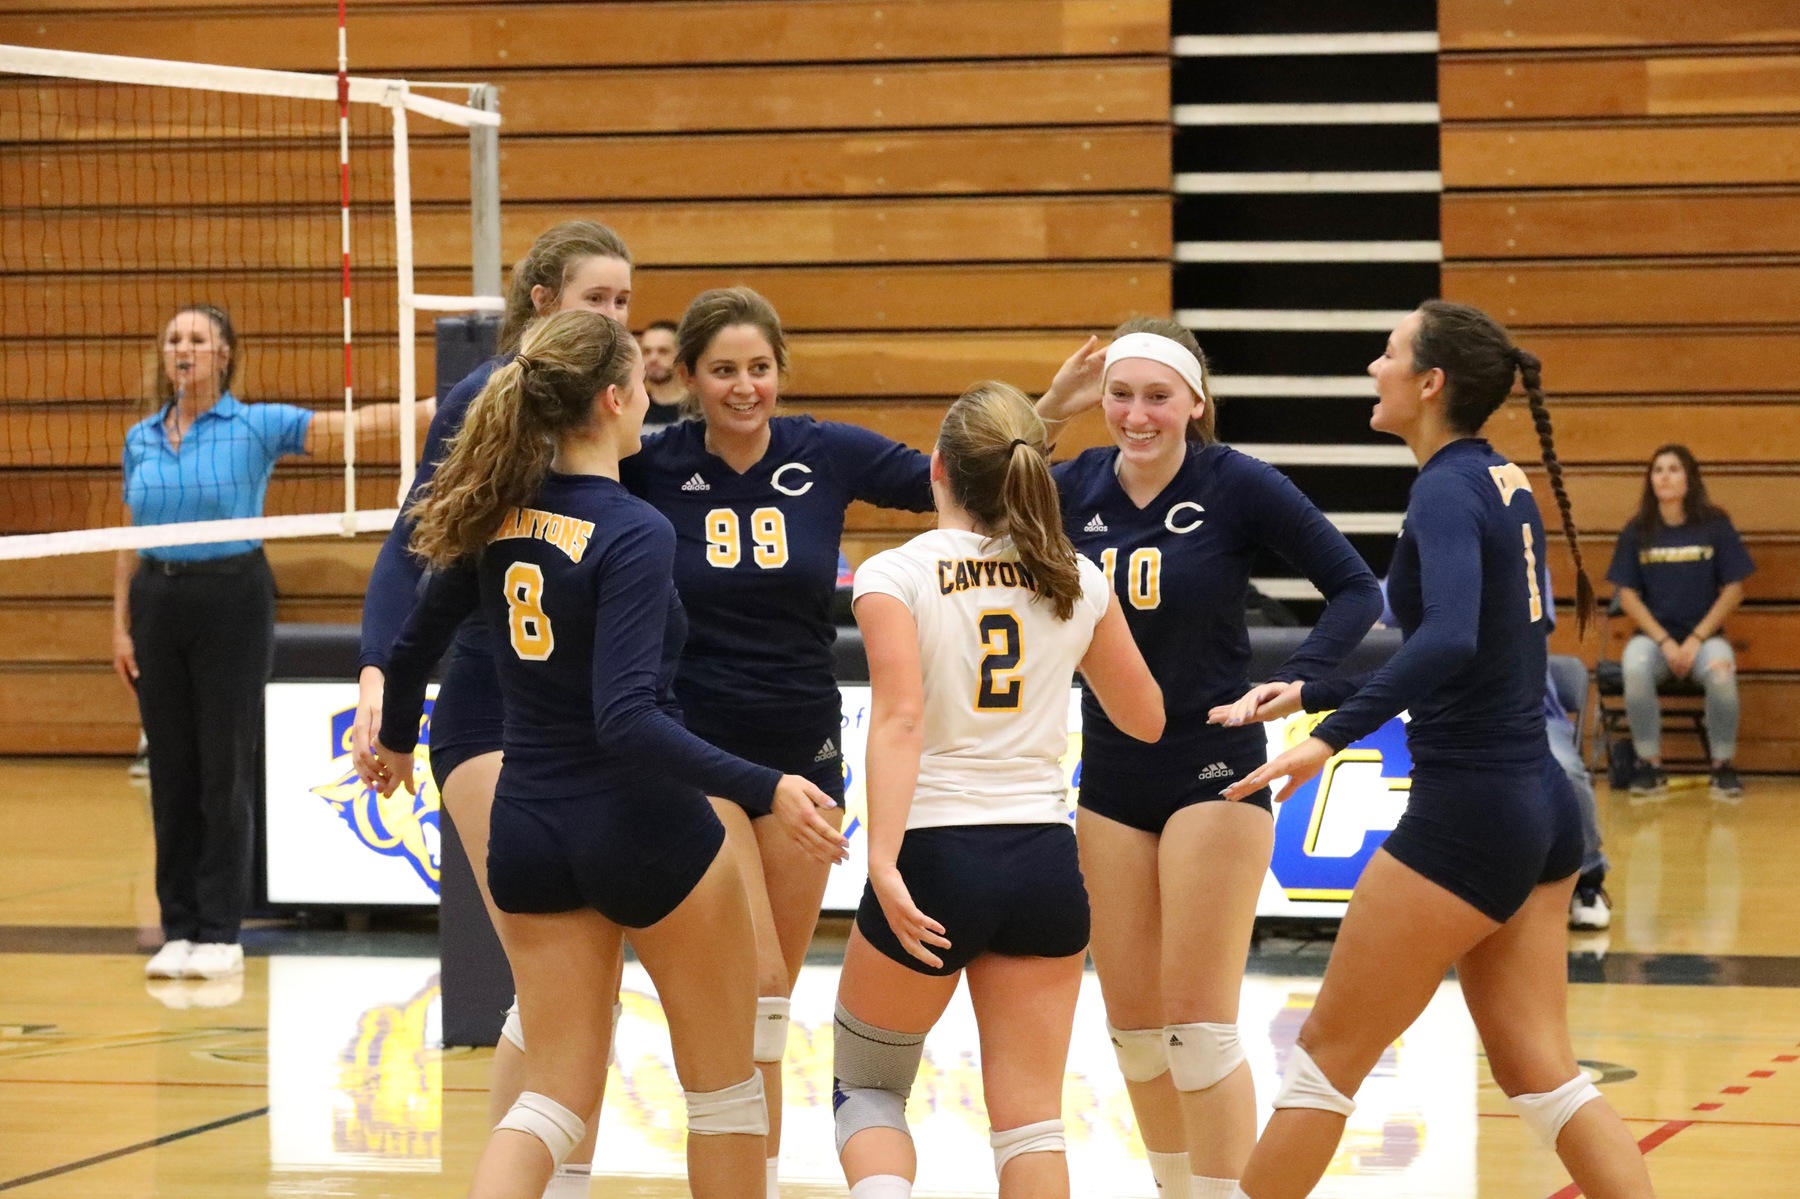 College of the Canyons has jumped to No. 9 in the most recent CCCWVCA statewide rankings after a week in which the Lady Cougars knocked off two top-five opponents, and lasted five sets vs. No. 8 Grossmont College. Jacob Velarde/COC Sports Information